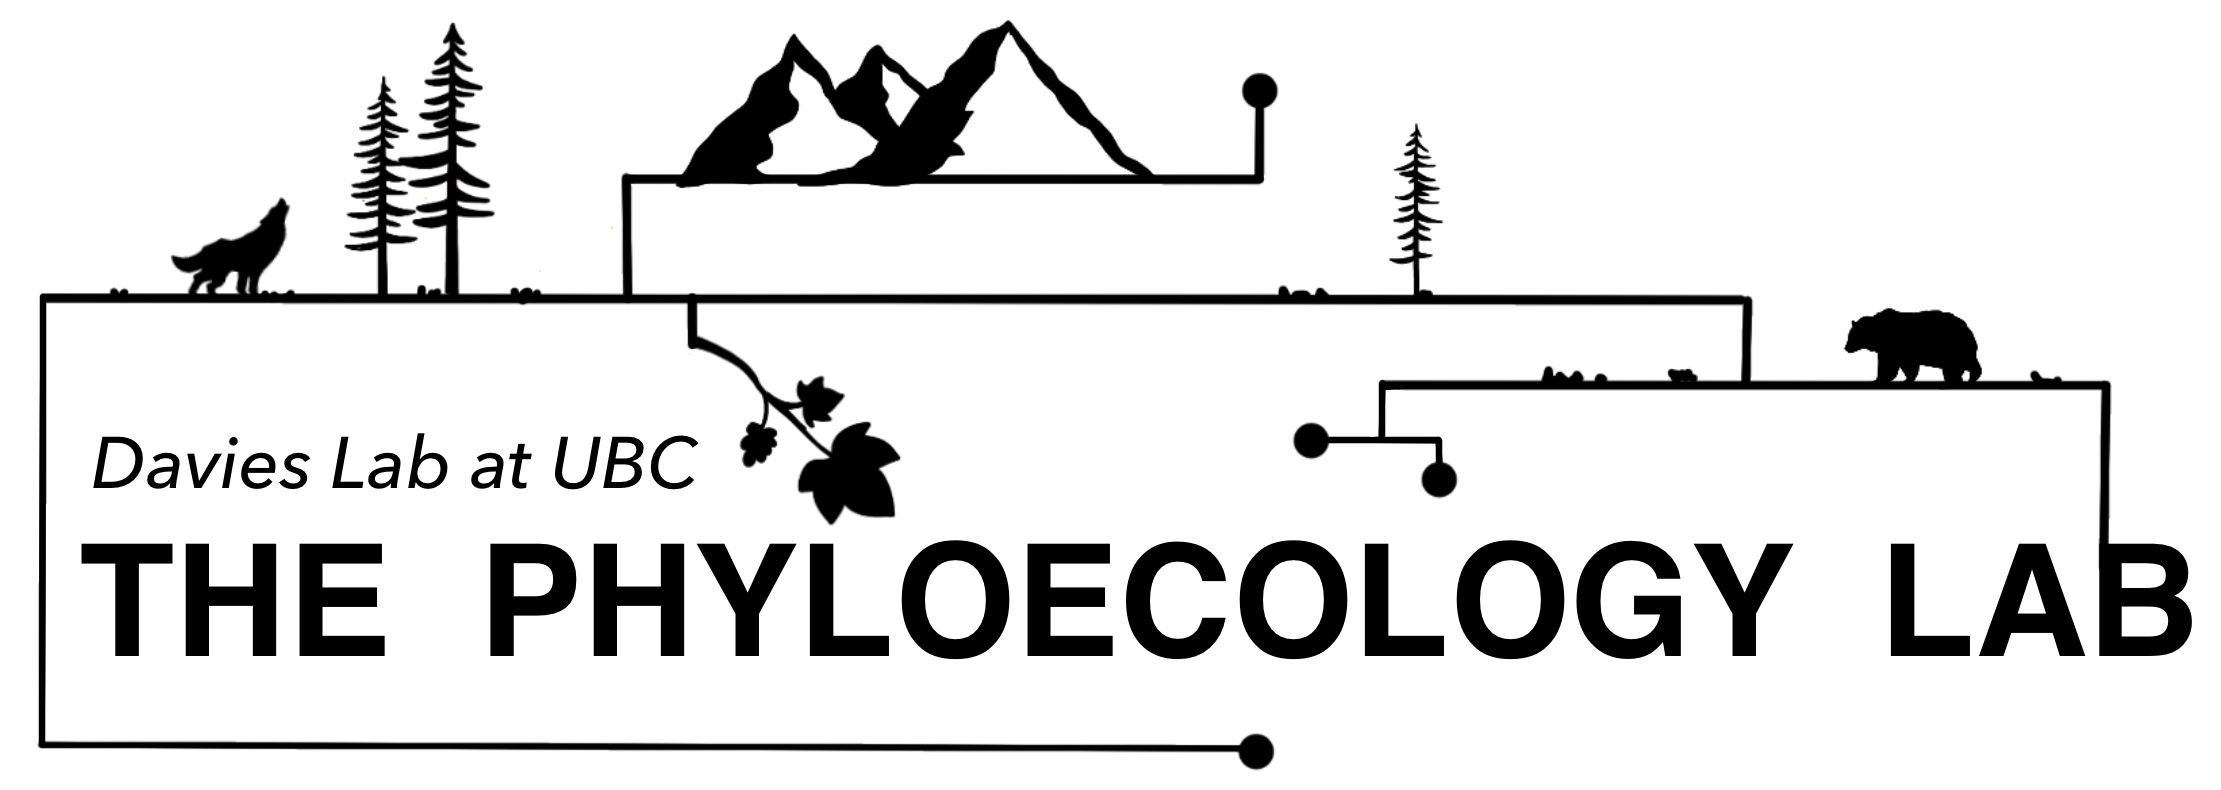 The PhyloEcology Lab